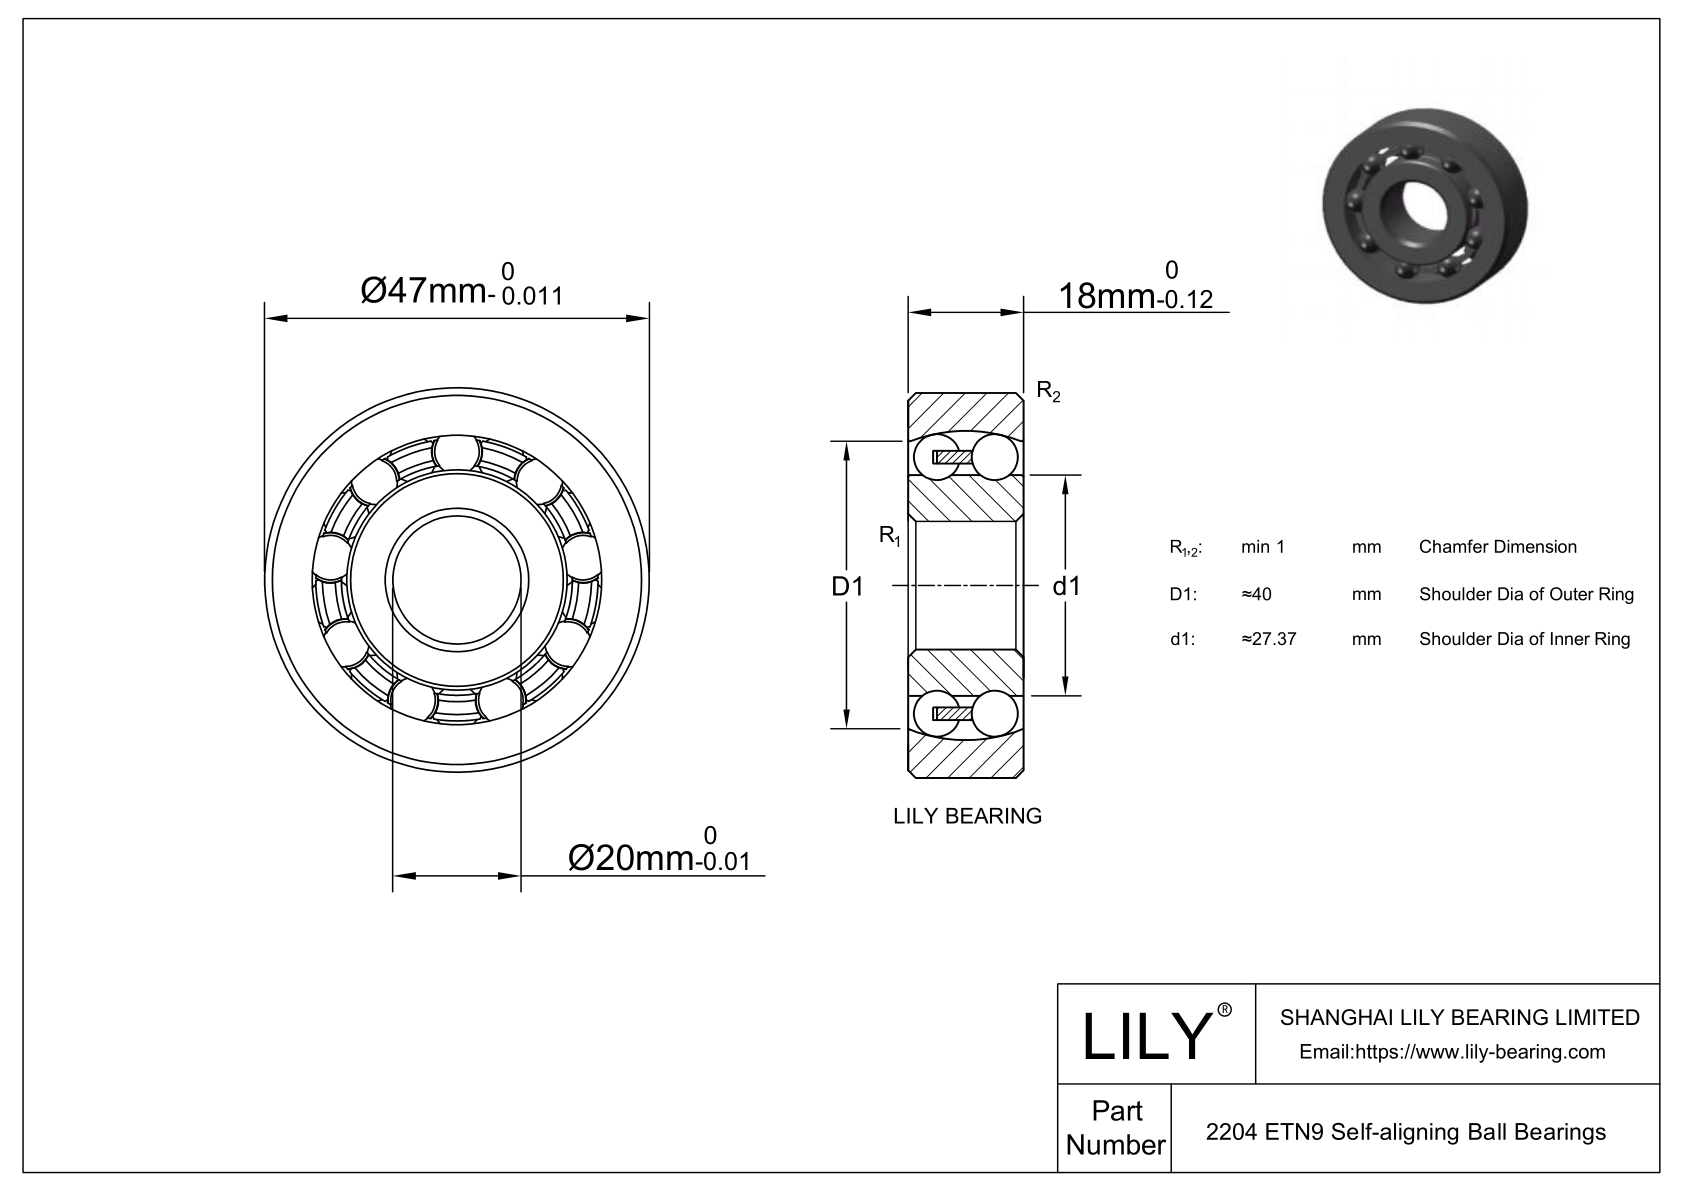 S2204 ETN9 Stainless Steel Self Aligning Ball Bearings cad drawing